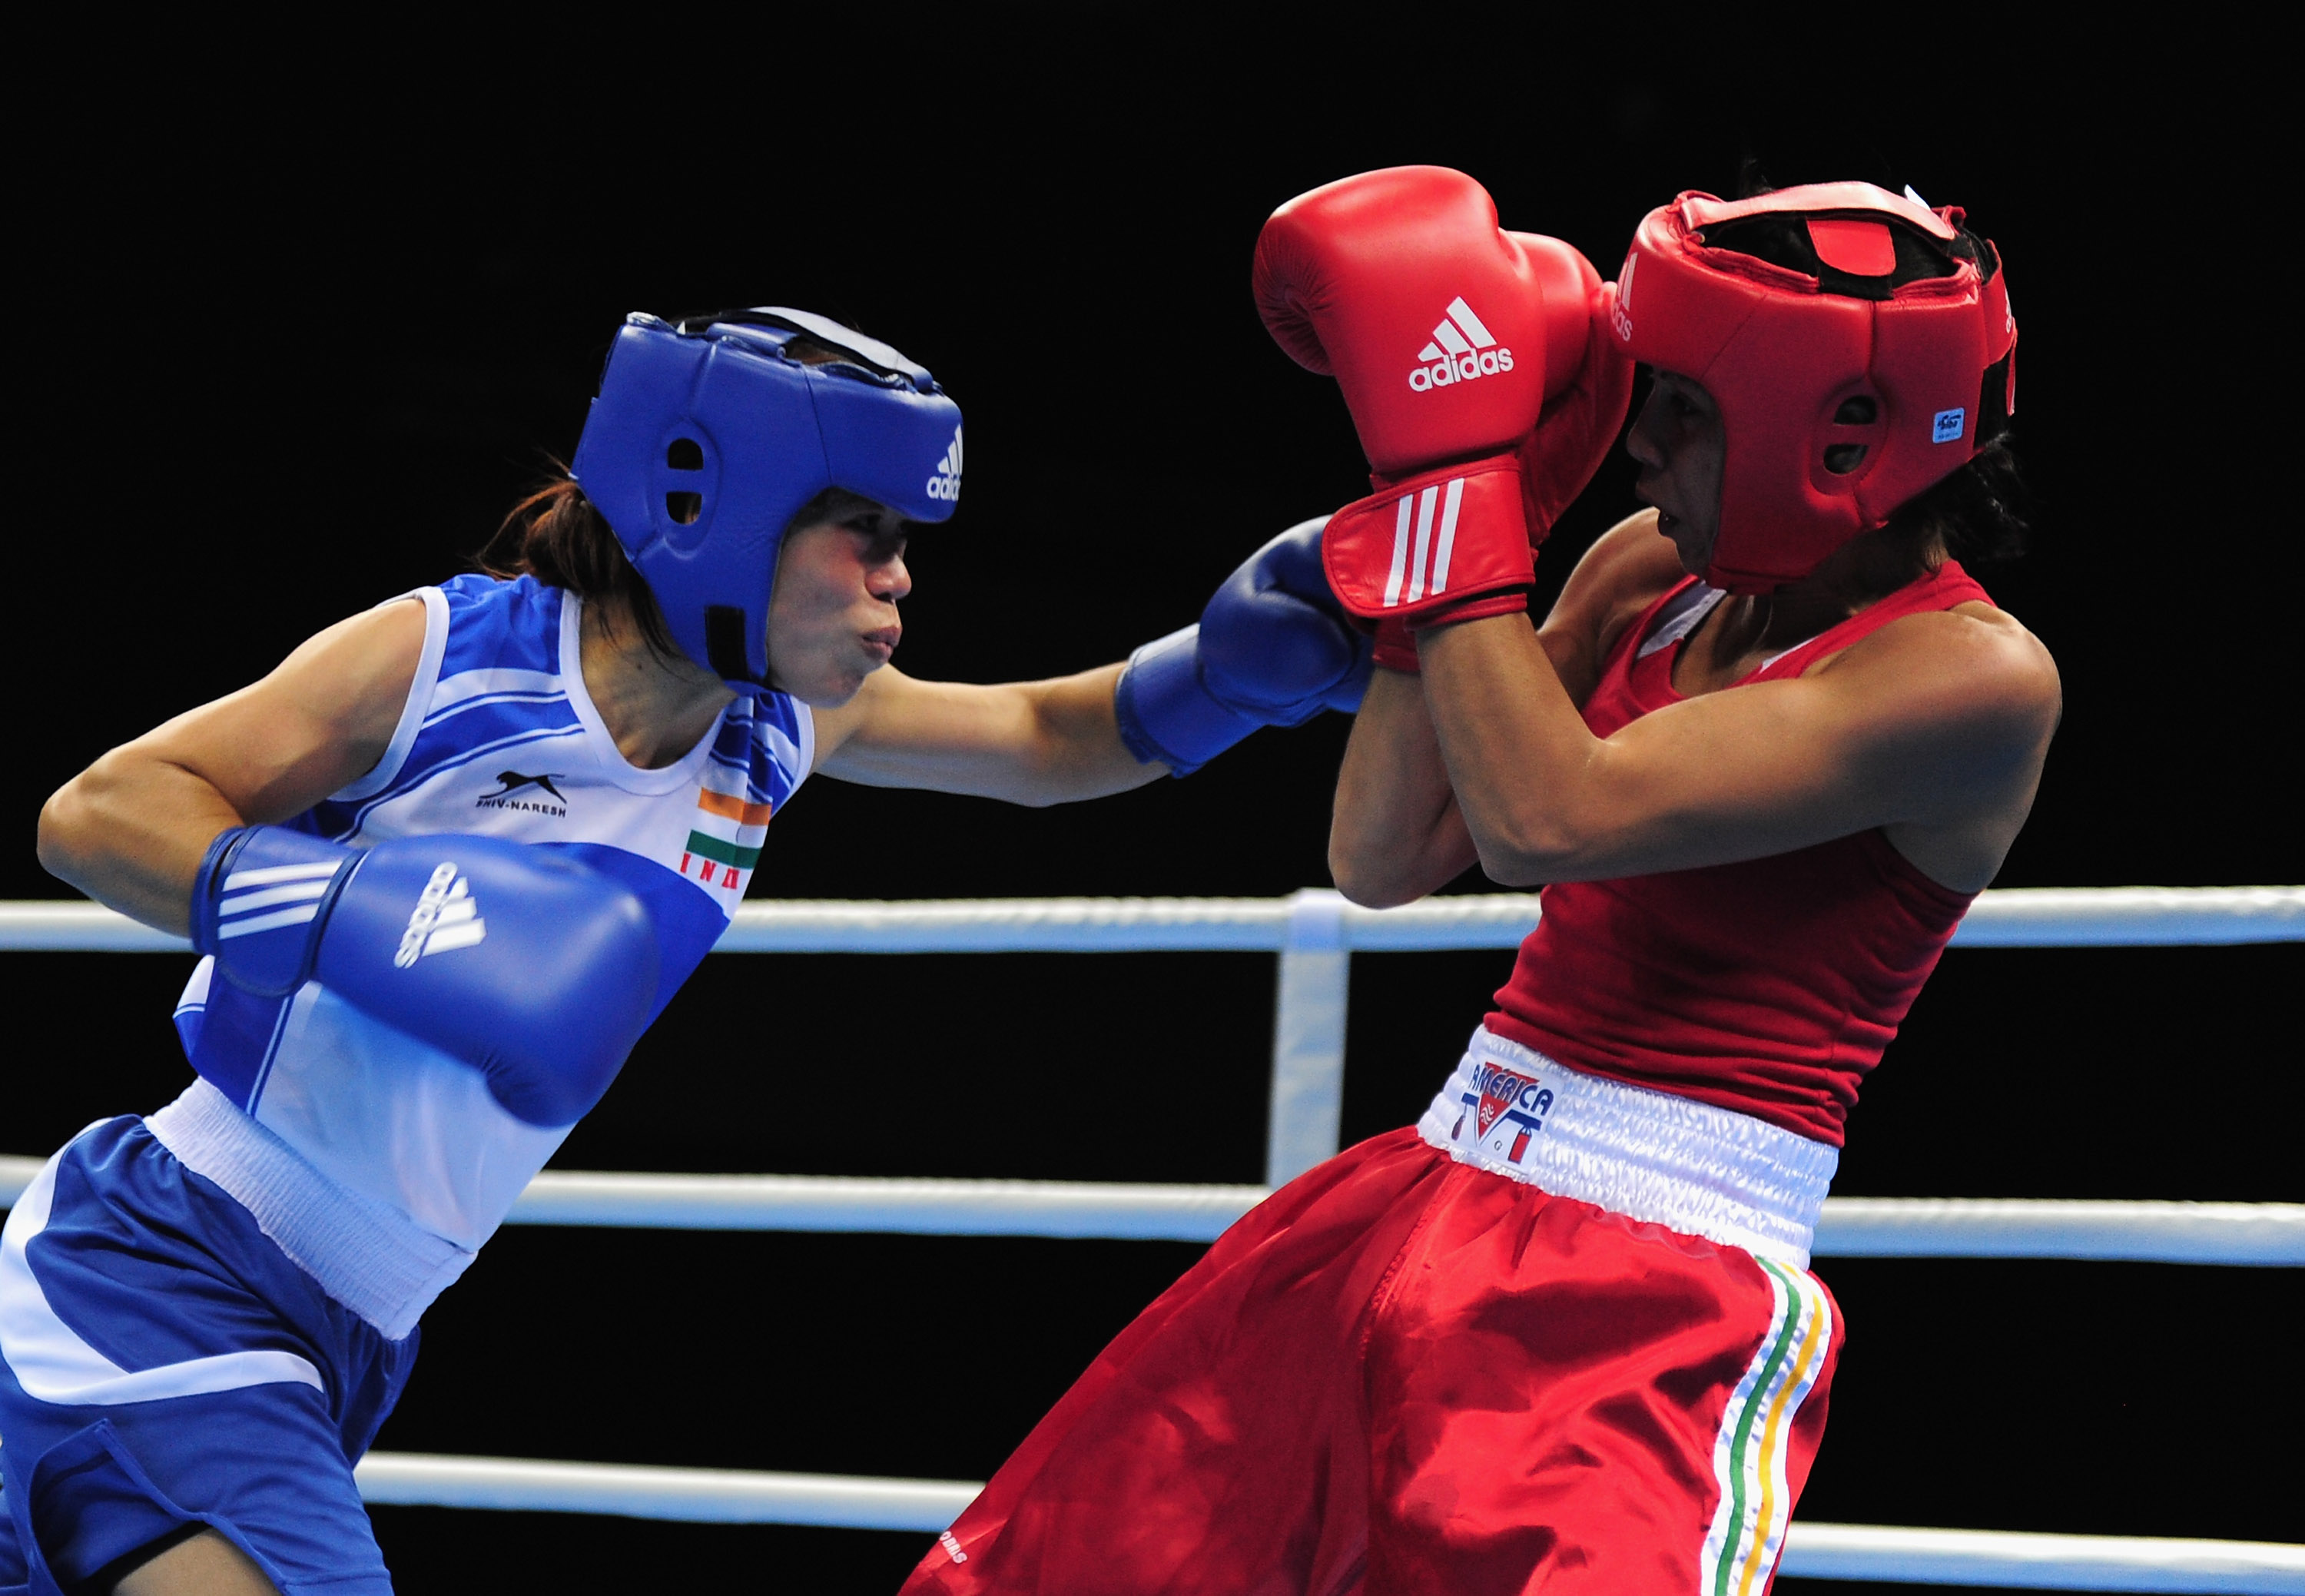 India Open Boxing | As many as 10 boxers assured medals for smaller draws